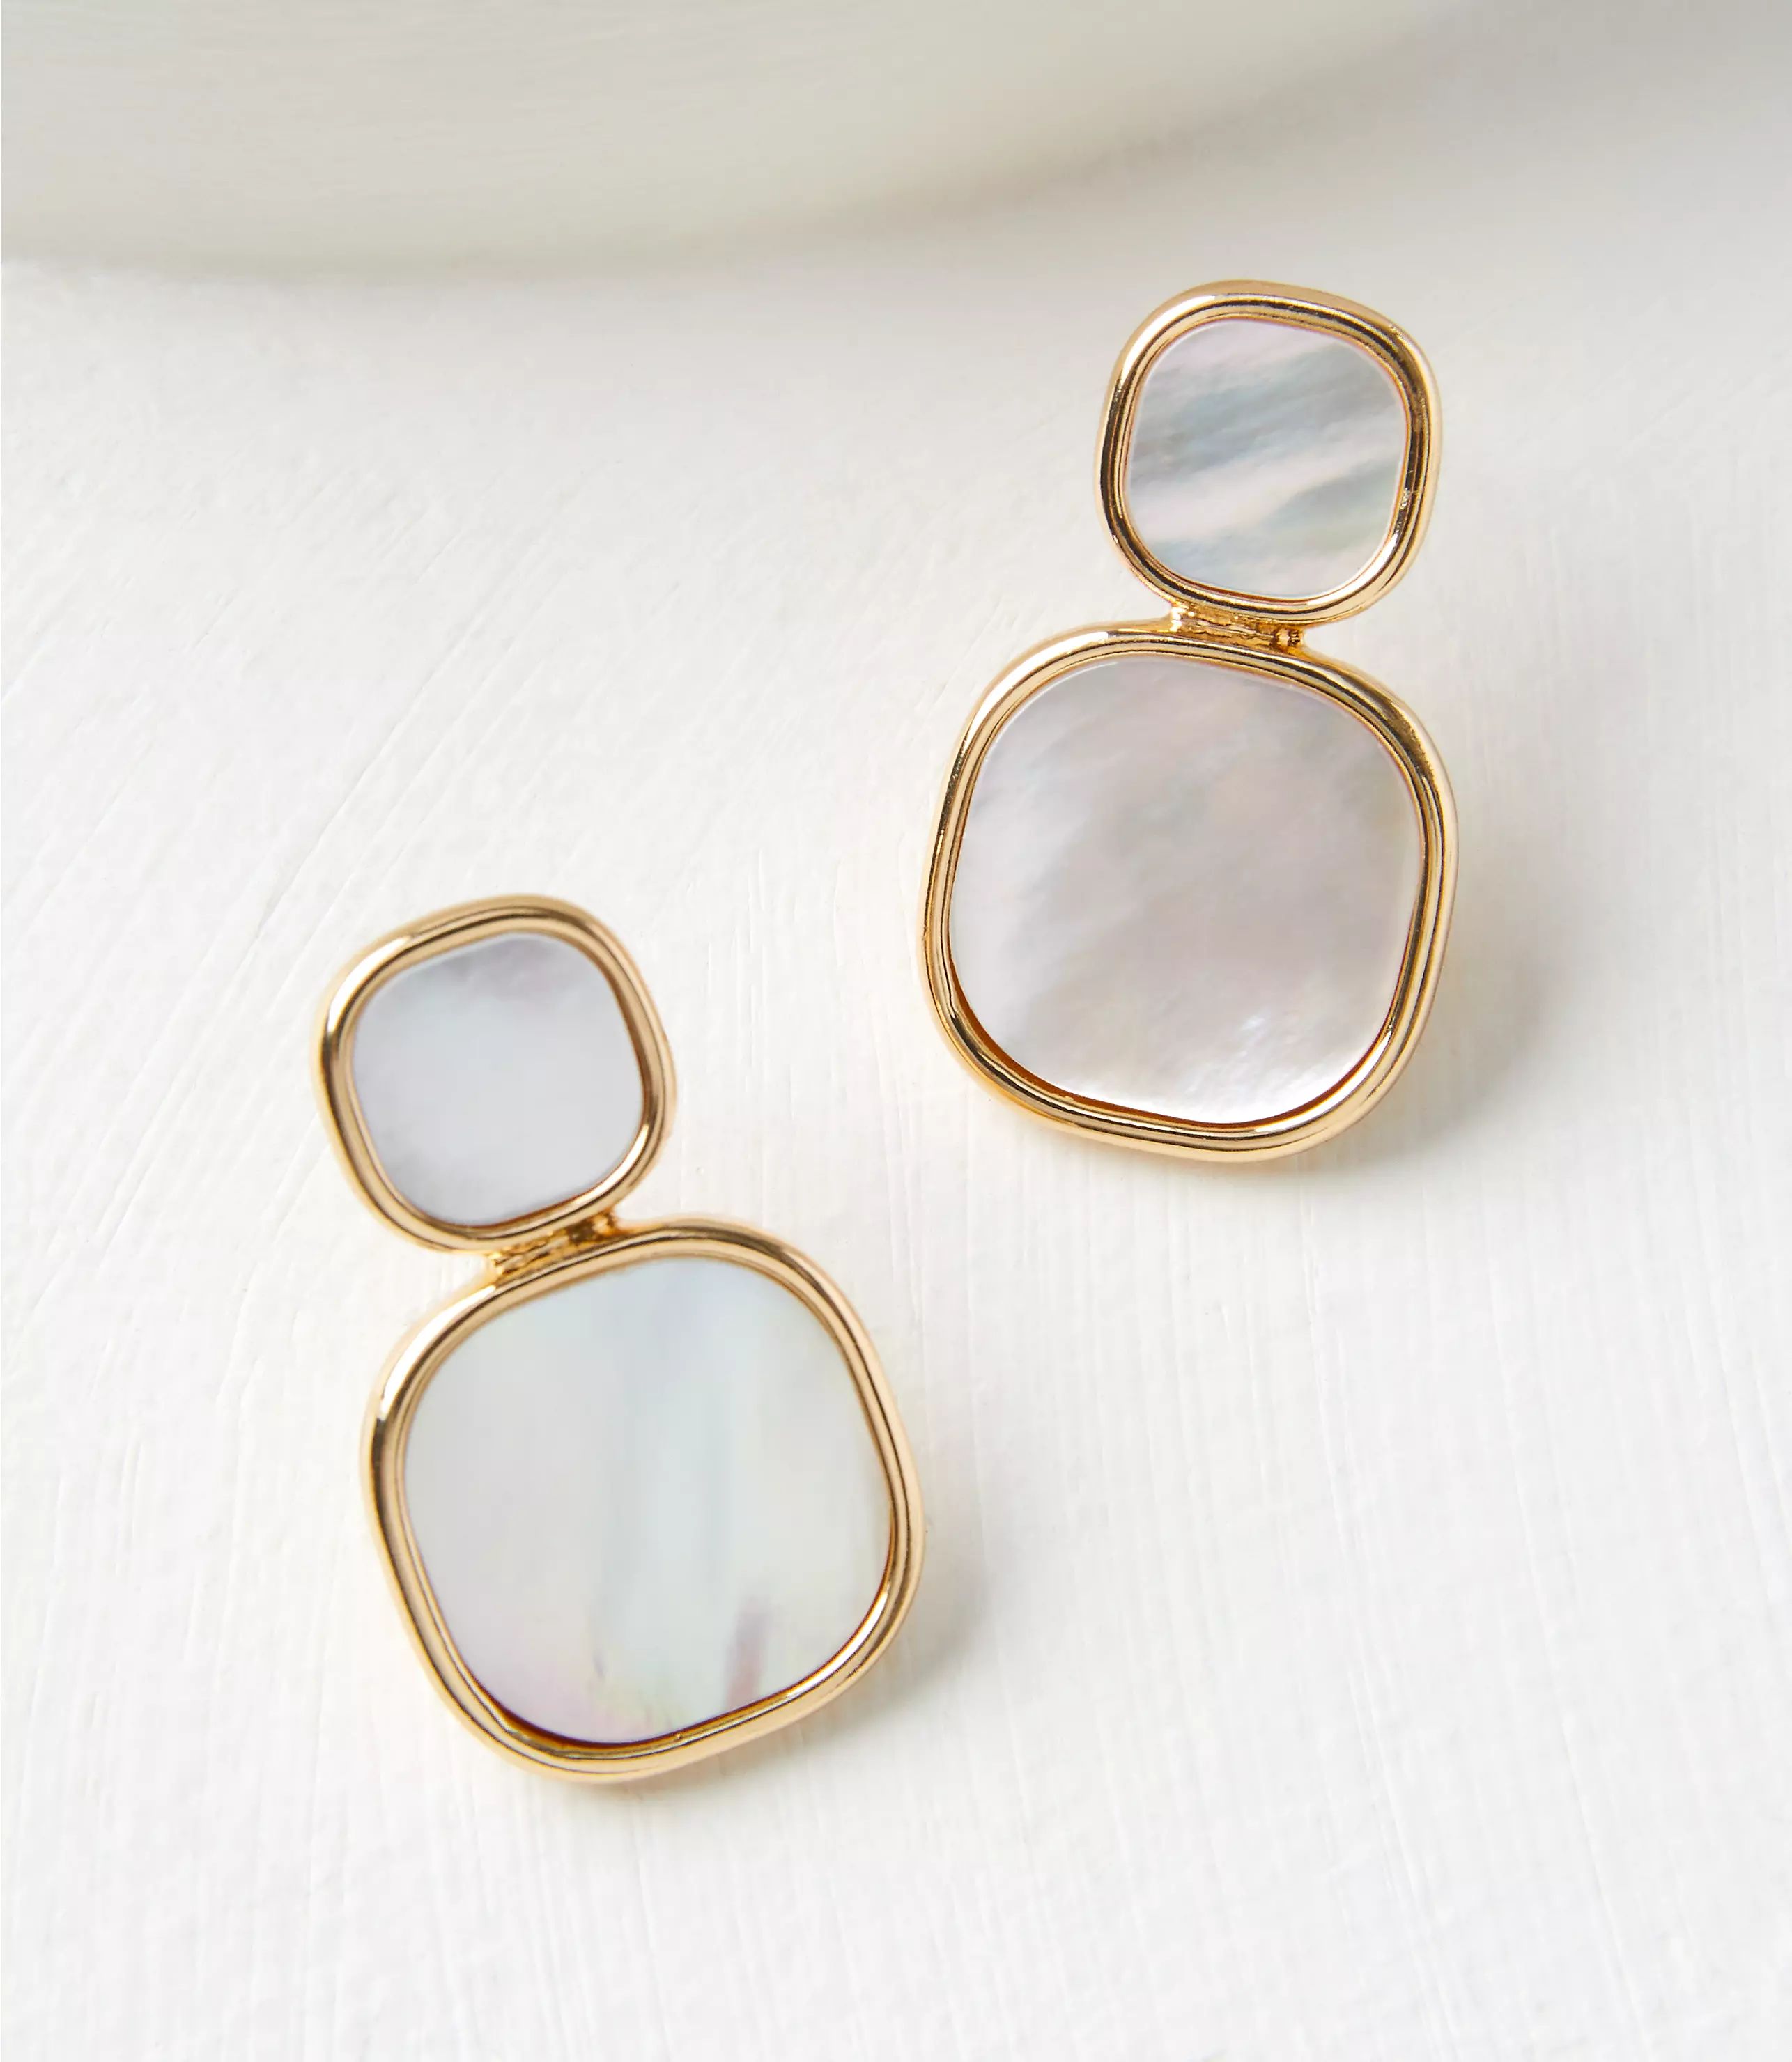 Rounded Square Drop Earrings | LOFT